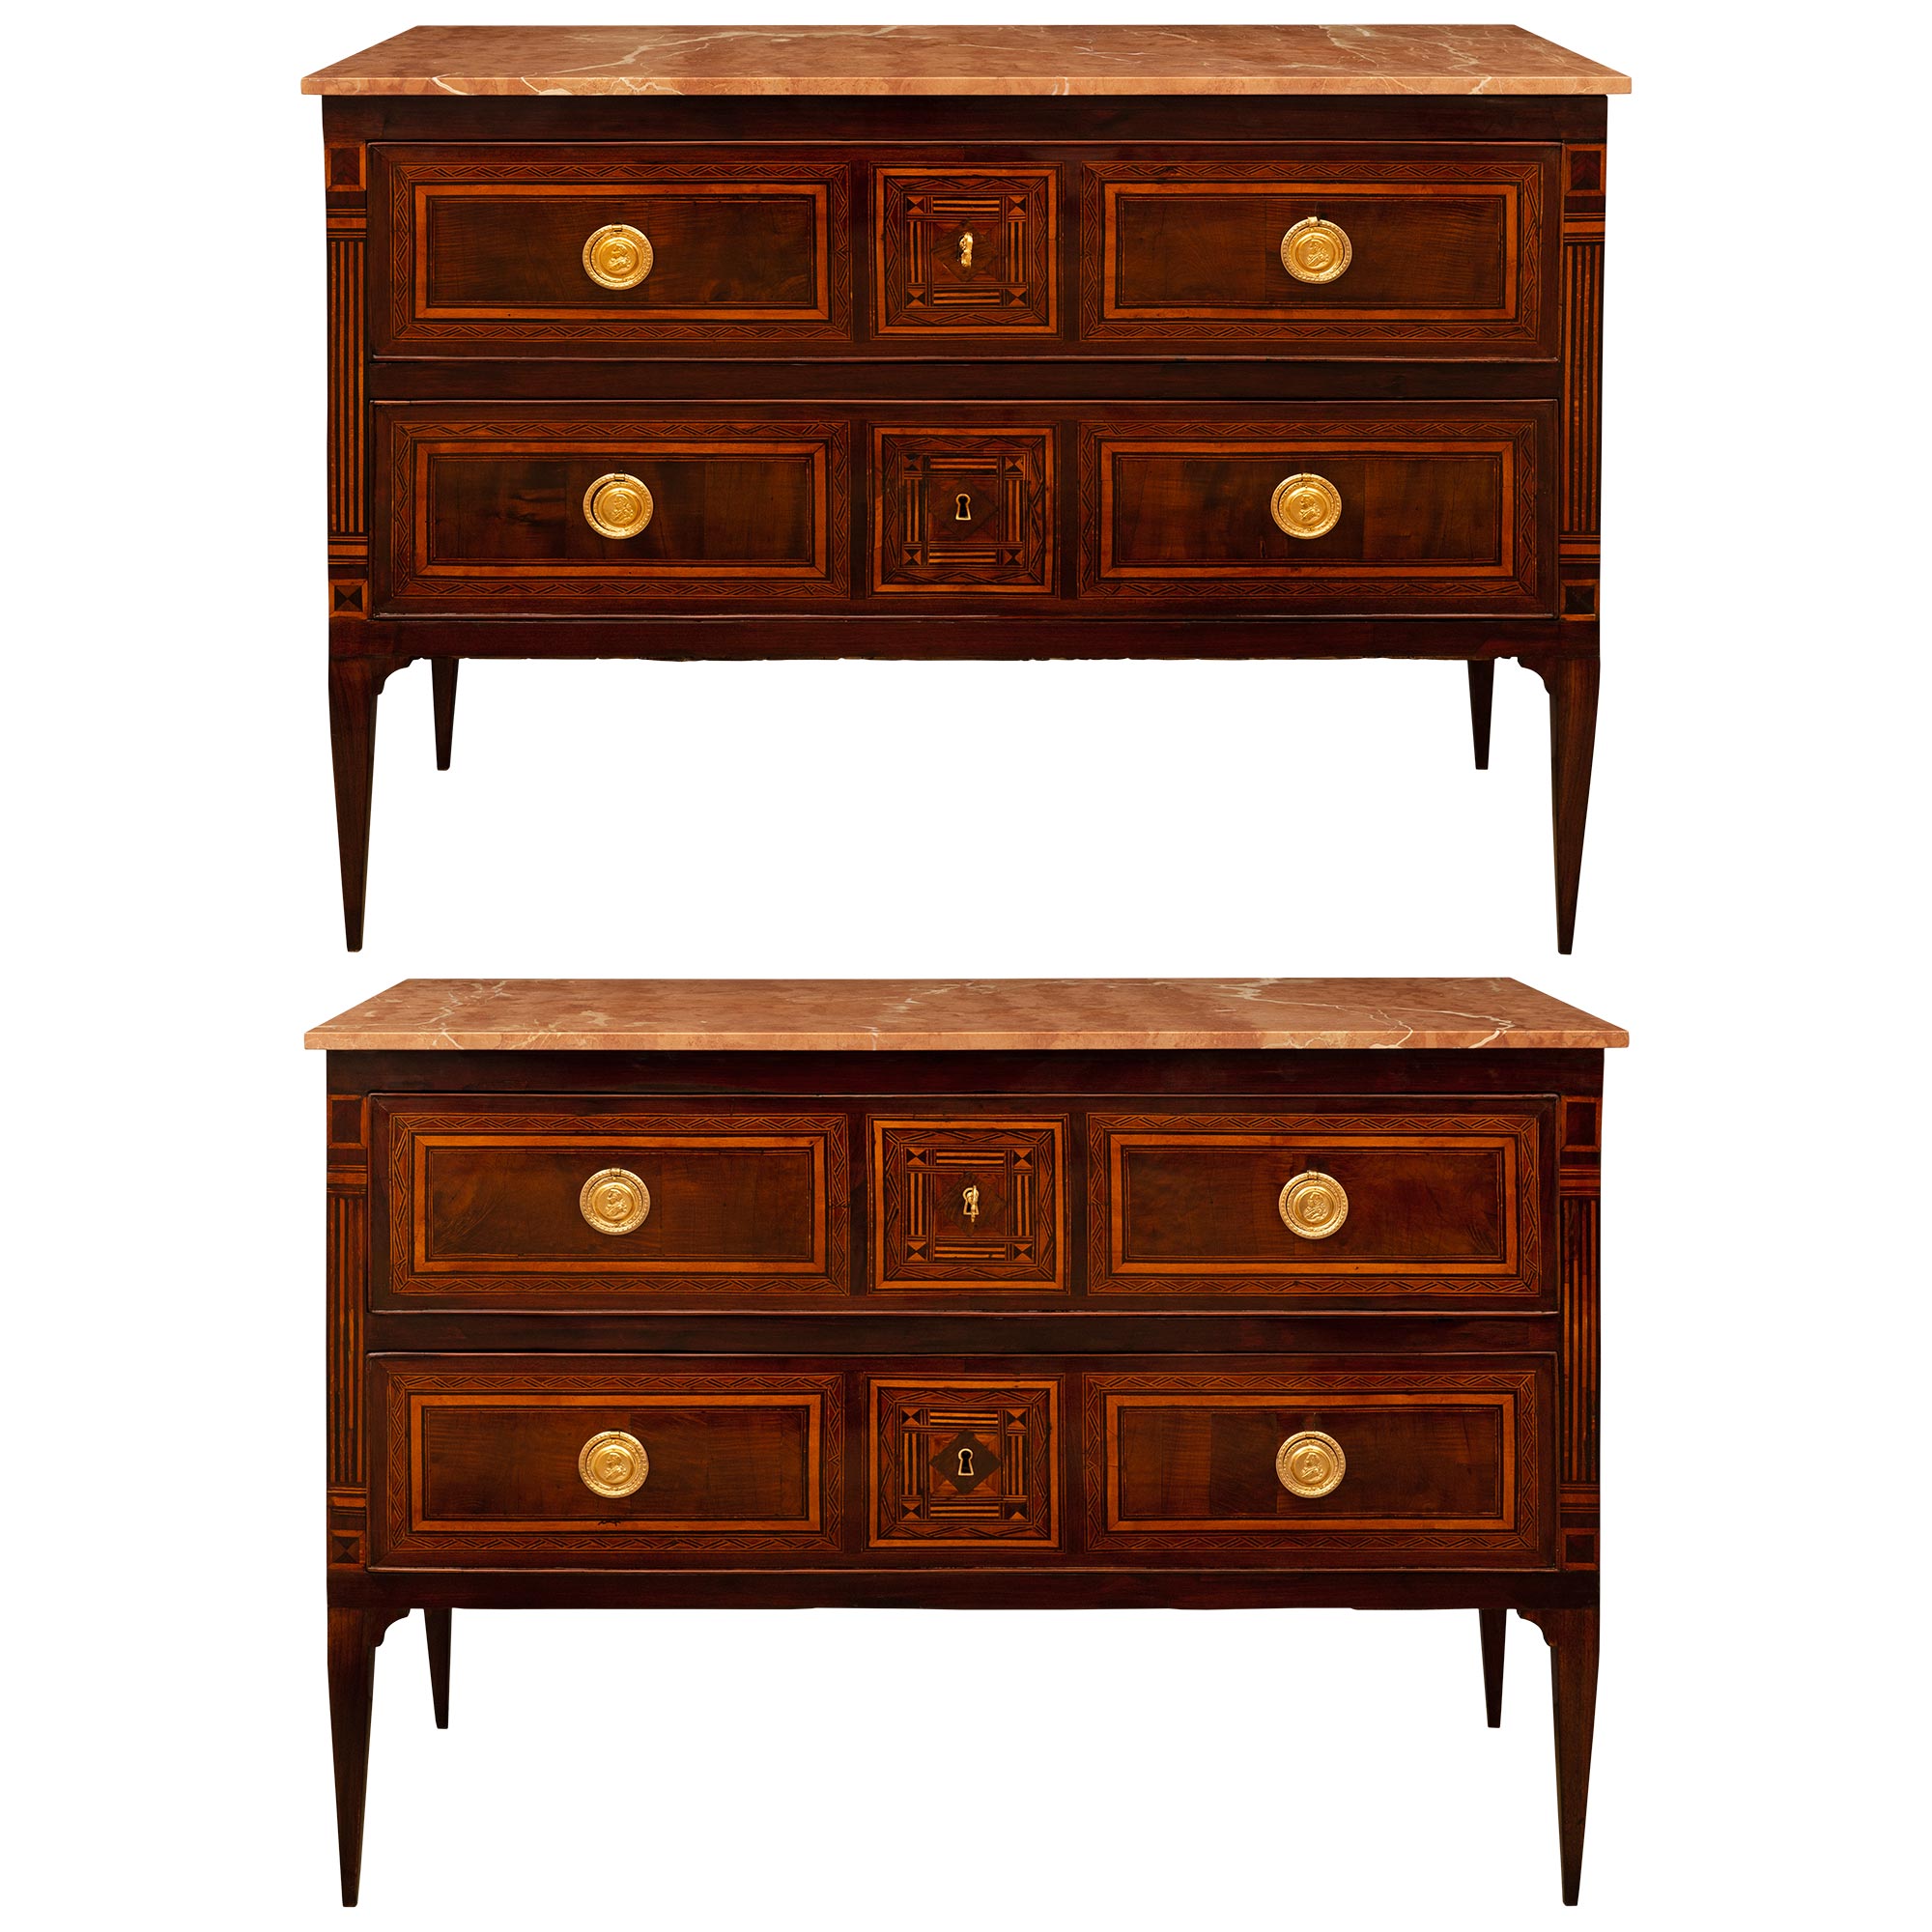 Pair Of Italian 18th c. Louis XVI Period Mahogany, Marble, & Ormolu Commodes For Sale